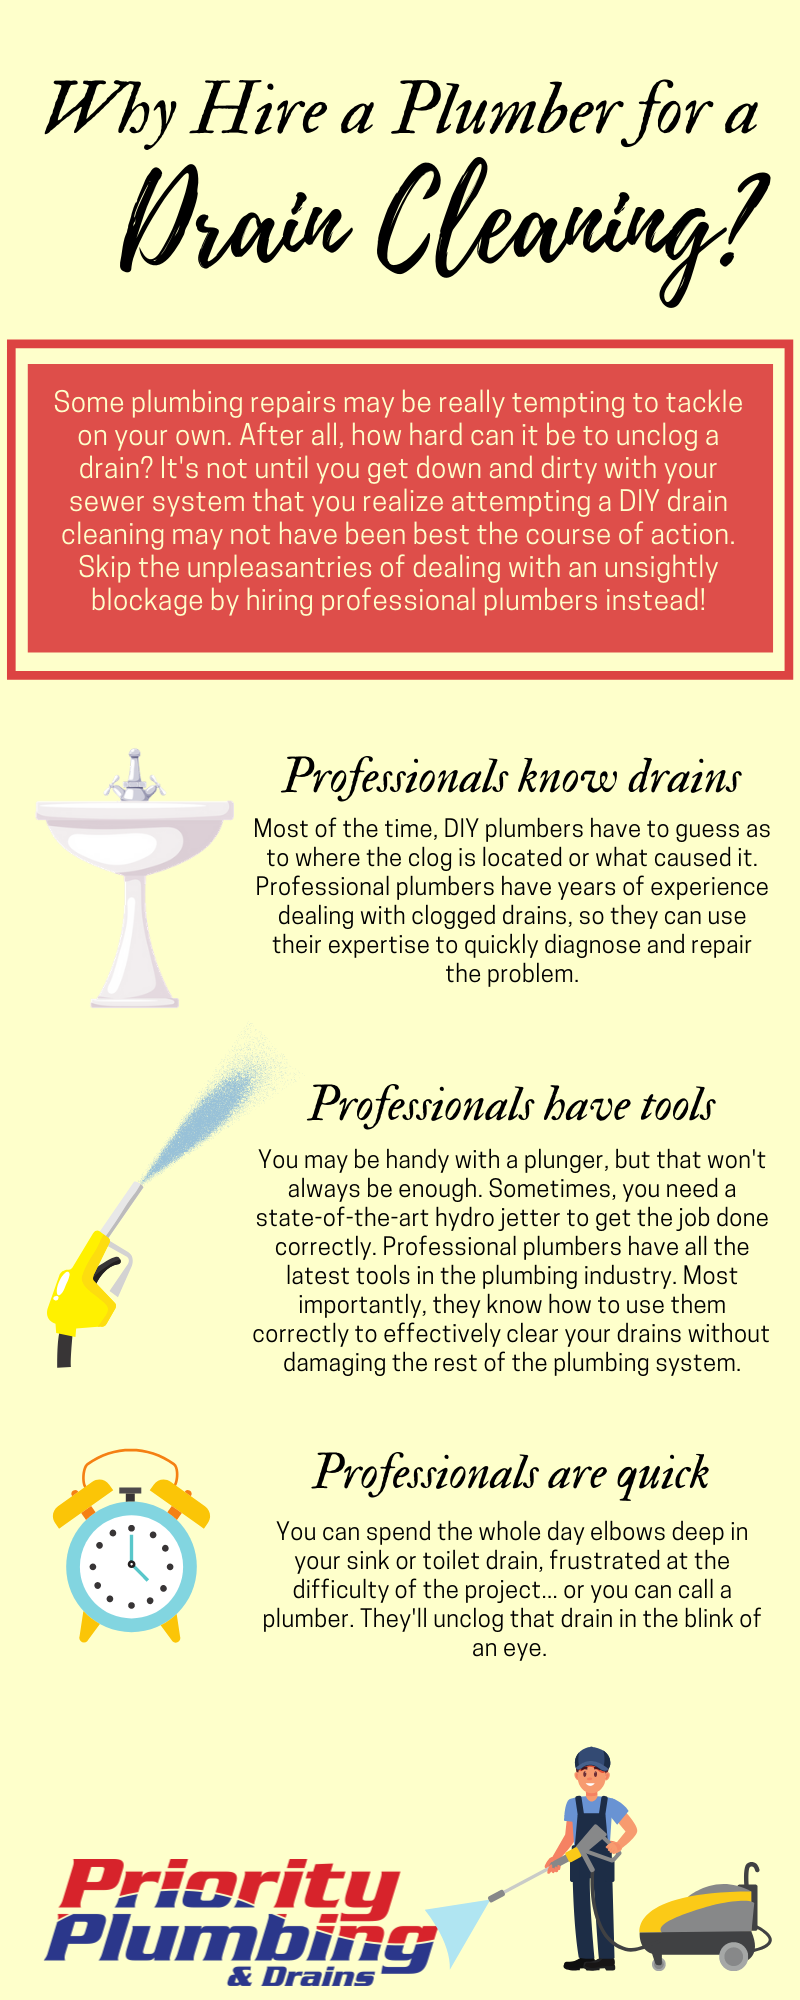 An infographic on the topic, "Why hire a plumber for a drain cleaning?" It also reads, "Professionals know drains. Professionals have tools. Professionals are quick."